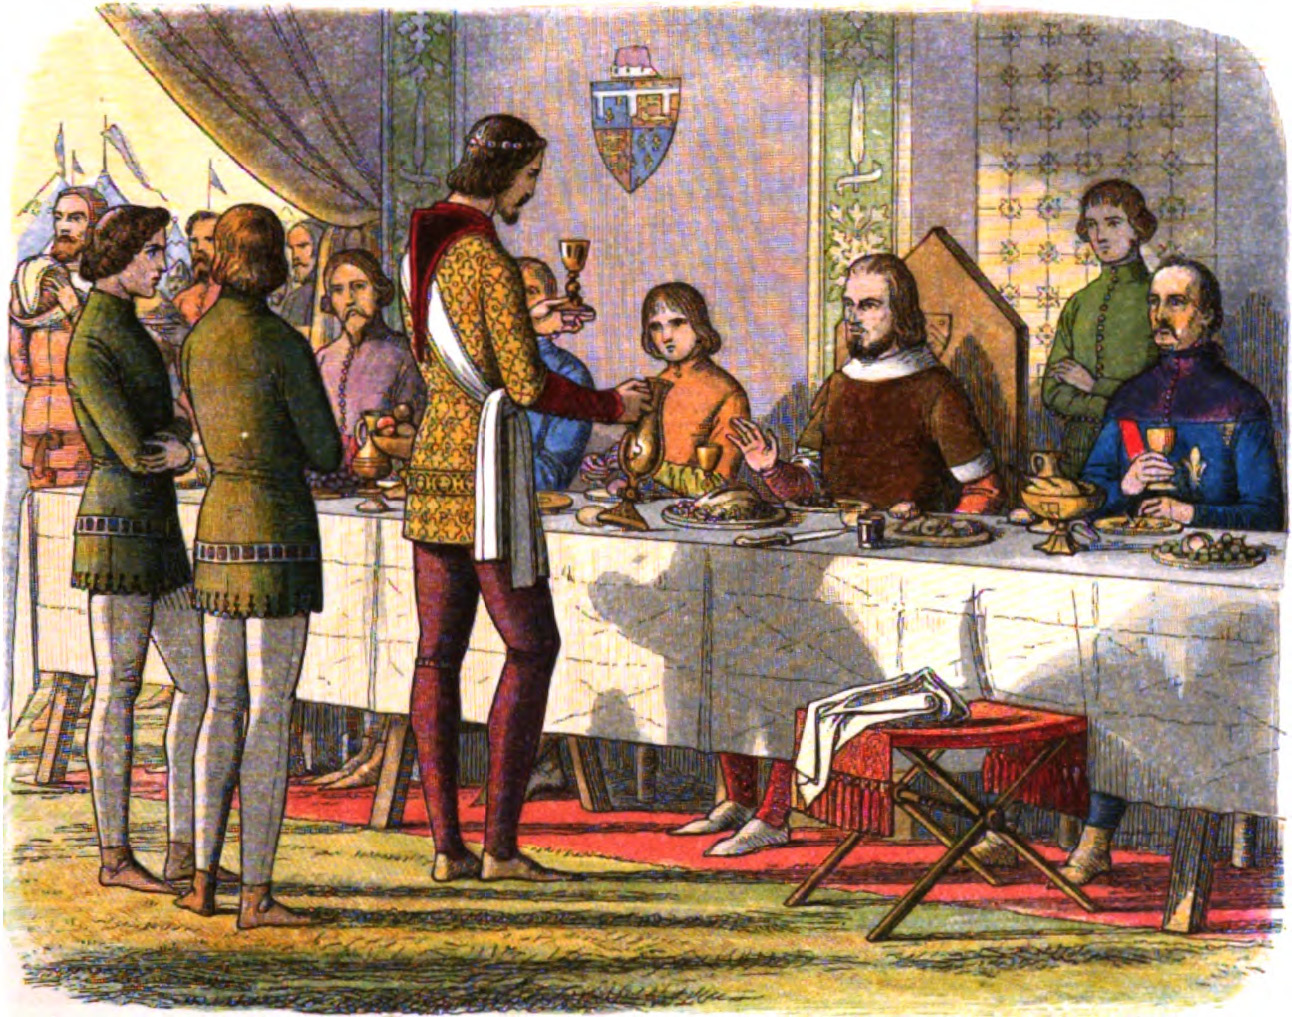 a_chronicle_of_england_page_309_the_prince_serves_king_john_at_table.jpg